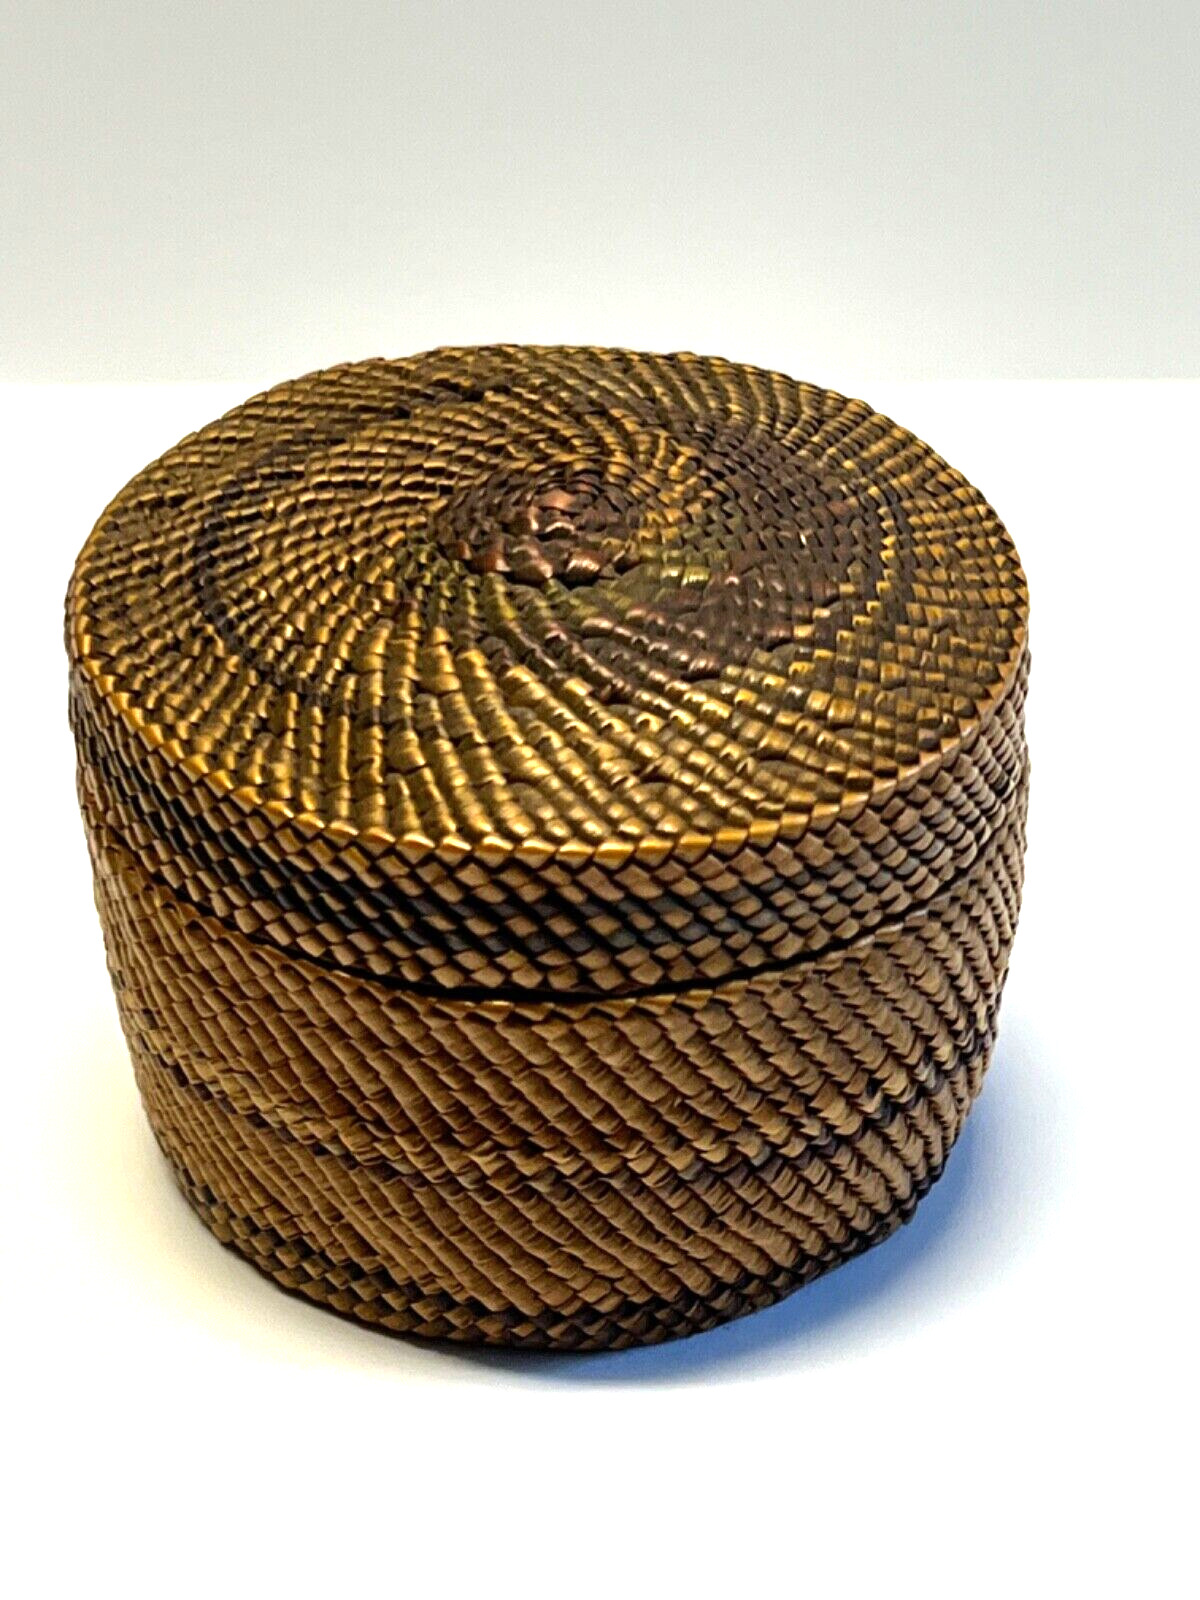 Nootka Alaskan Hand Woven Basket; Original & Collectible; Small with Lid; Lot 12